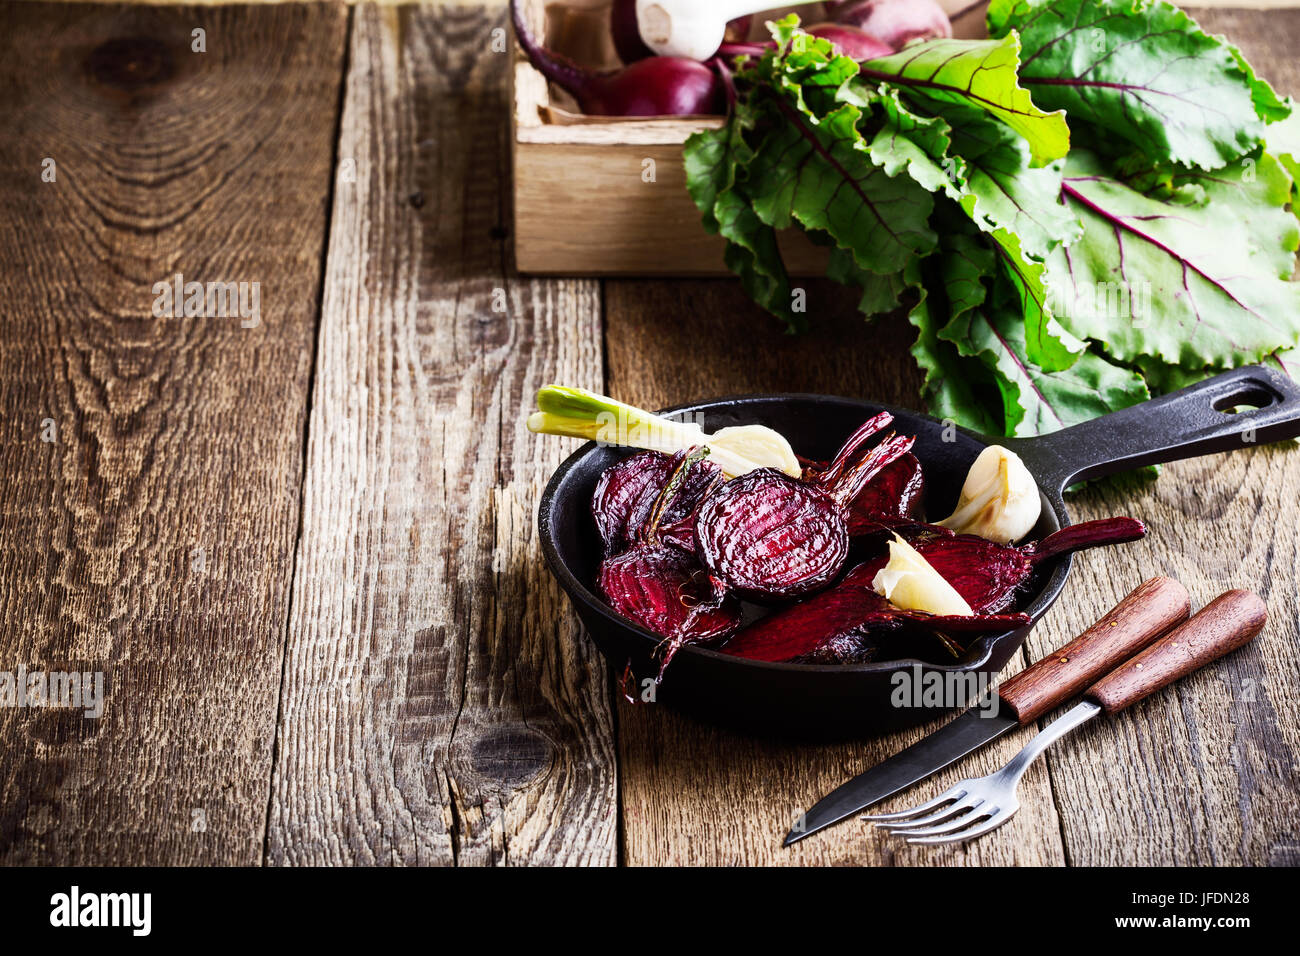 Roasted beetroots in cast iron skillet and fresh vegetables in crate on wooden rustic table Stock Photo